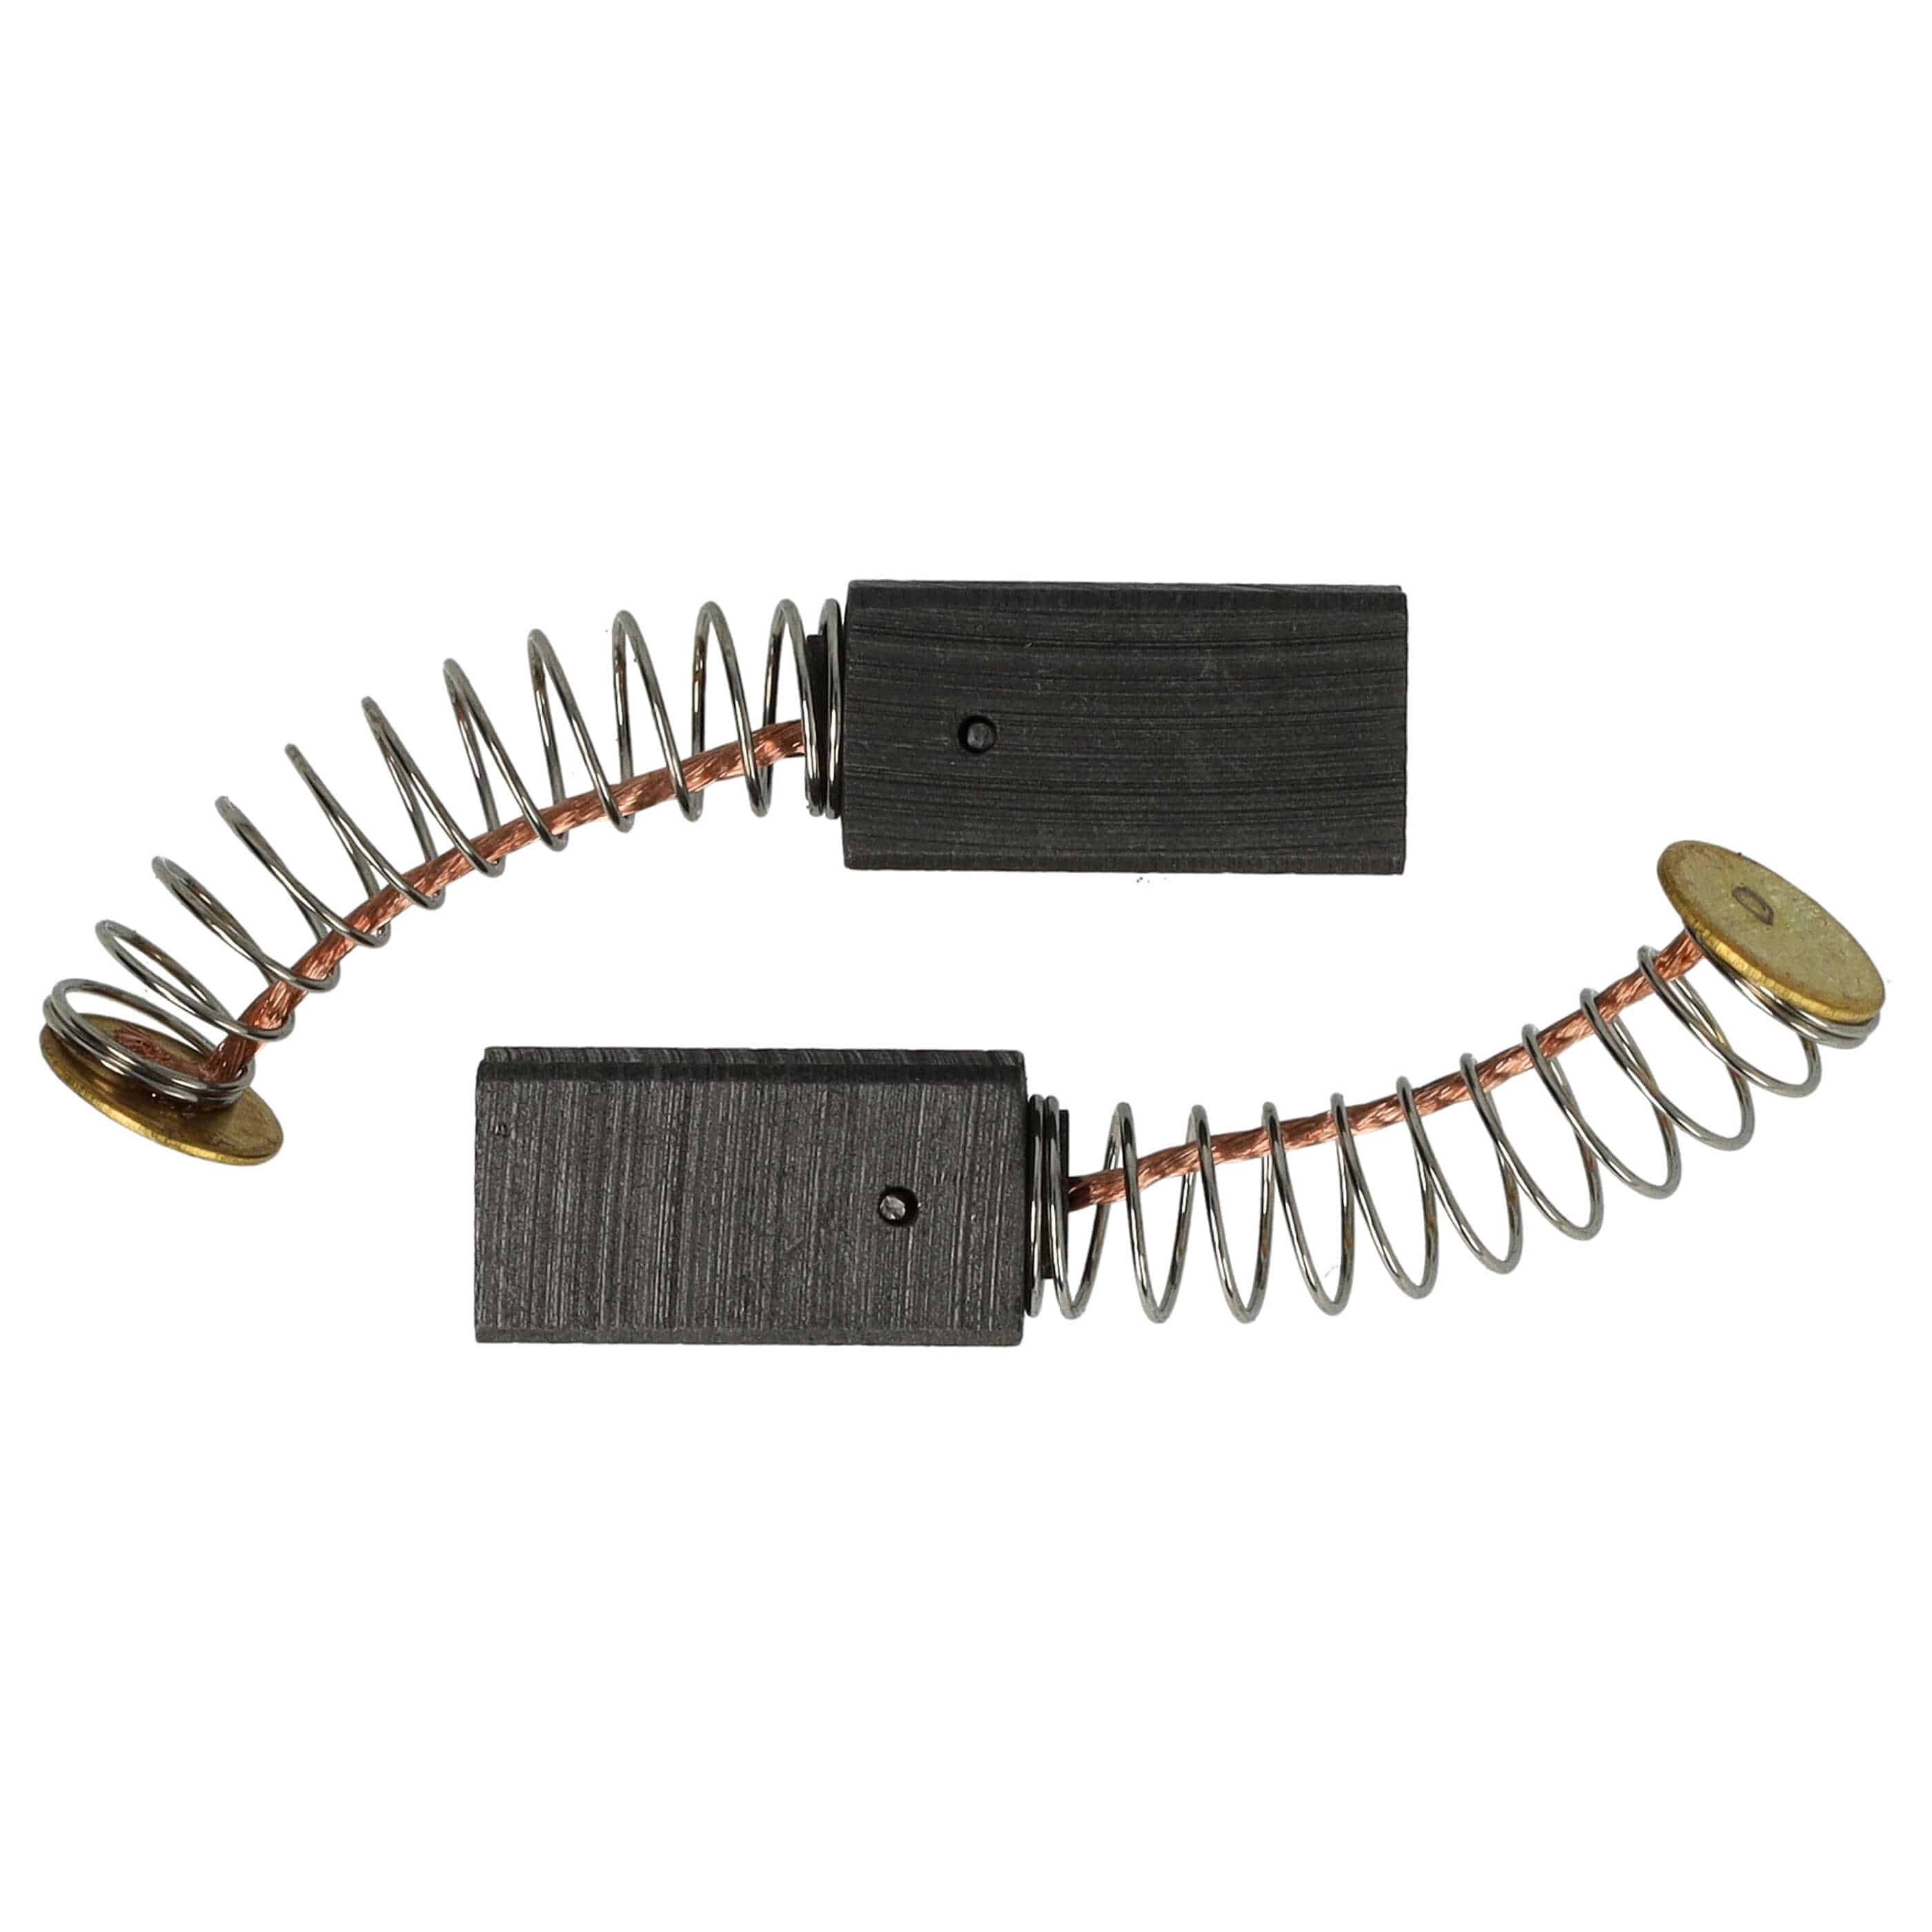 2x Carbon Brush as Replacement for Bosch 2604321905 Electric Power Tools + Spring, 19 x 13 x 12mm